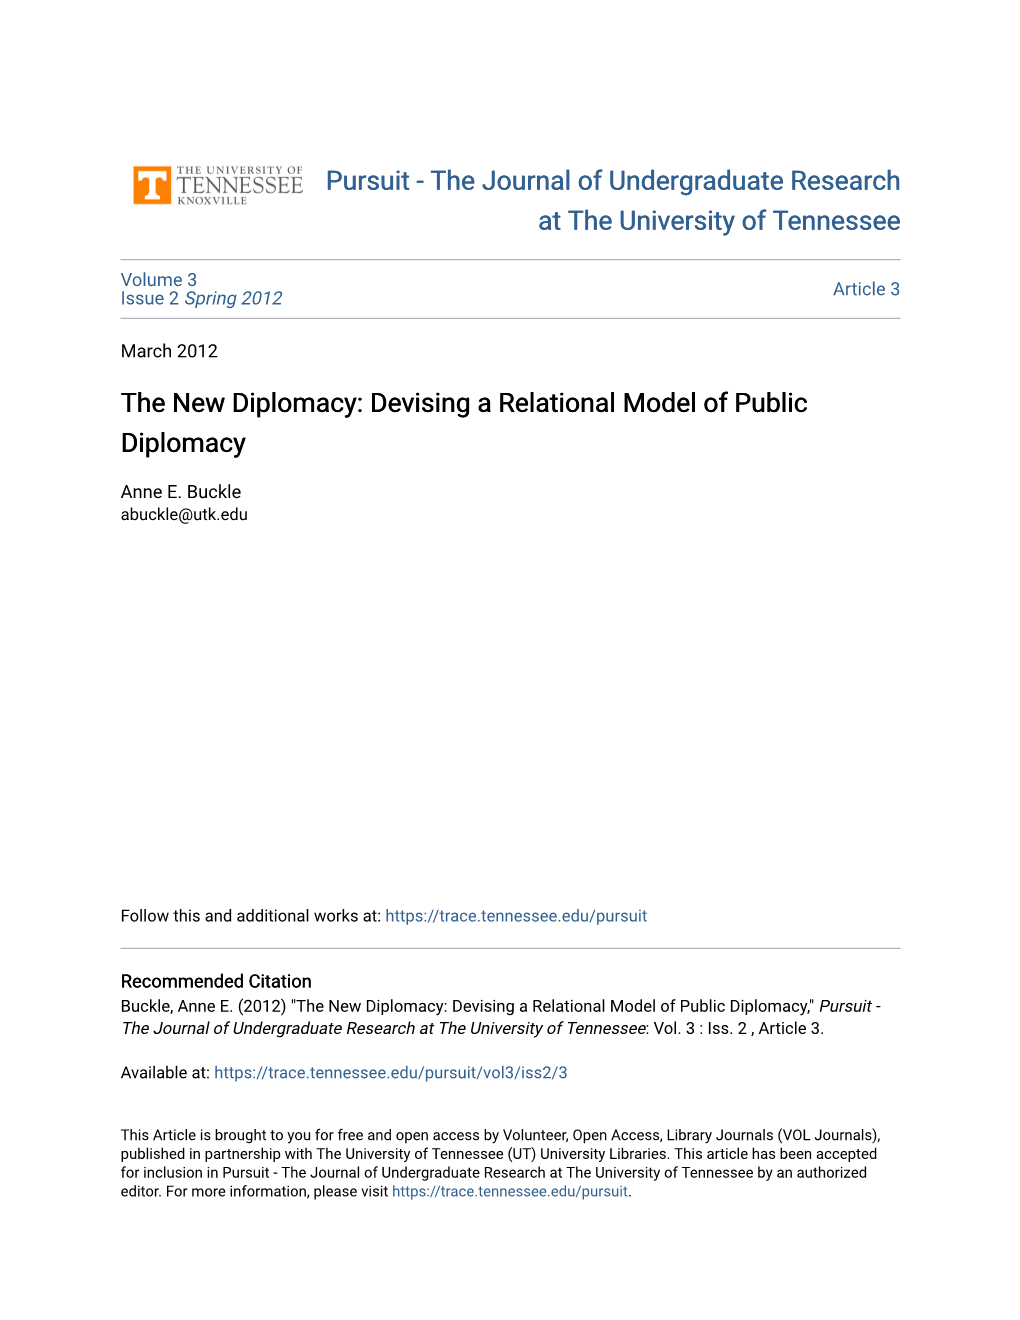 Devising a Relational Model of Public Diplomacy